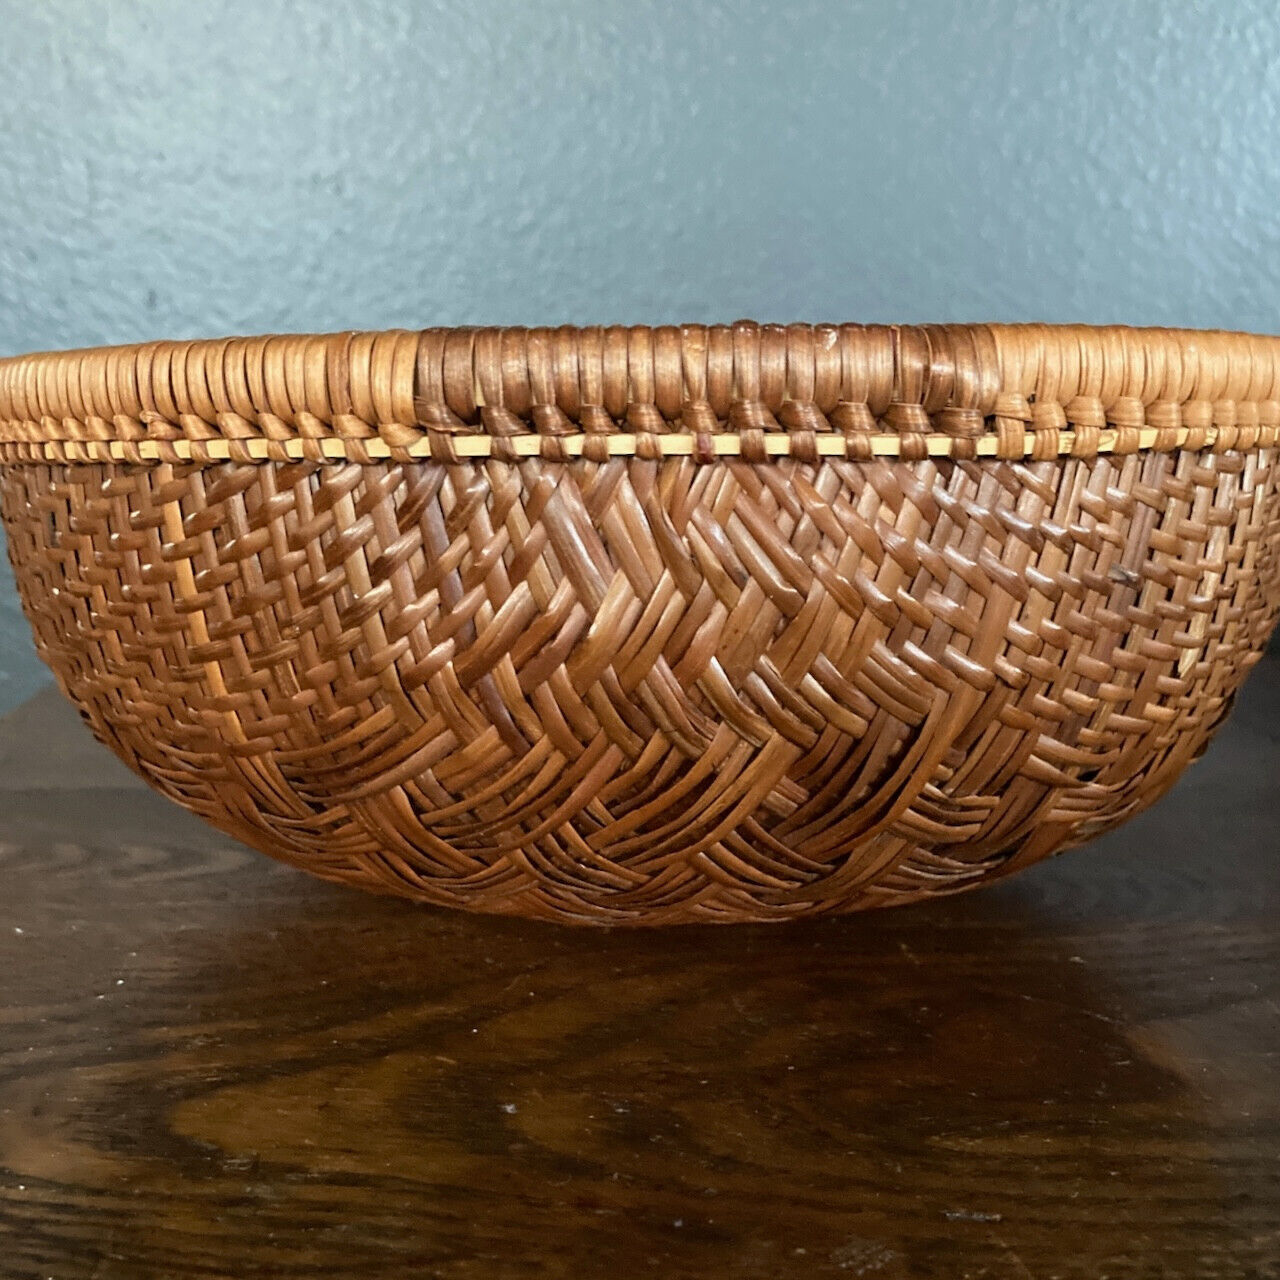 Basket, Over 50 Years Old, With Intricate Weaving and Finished Band